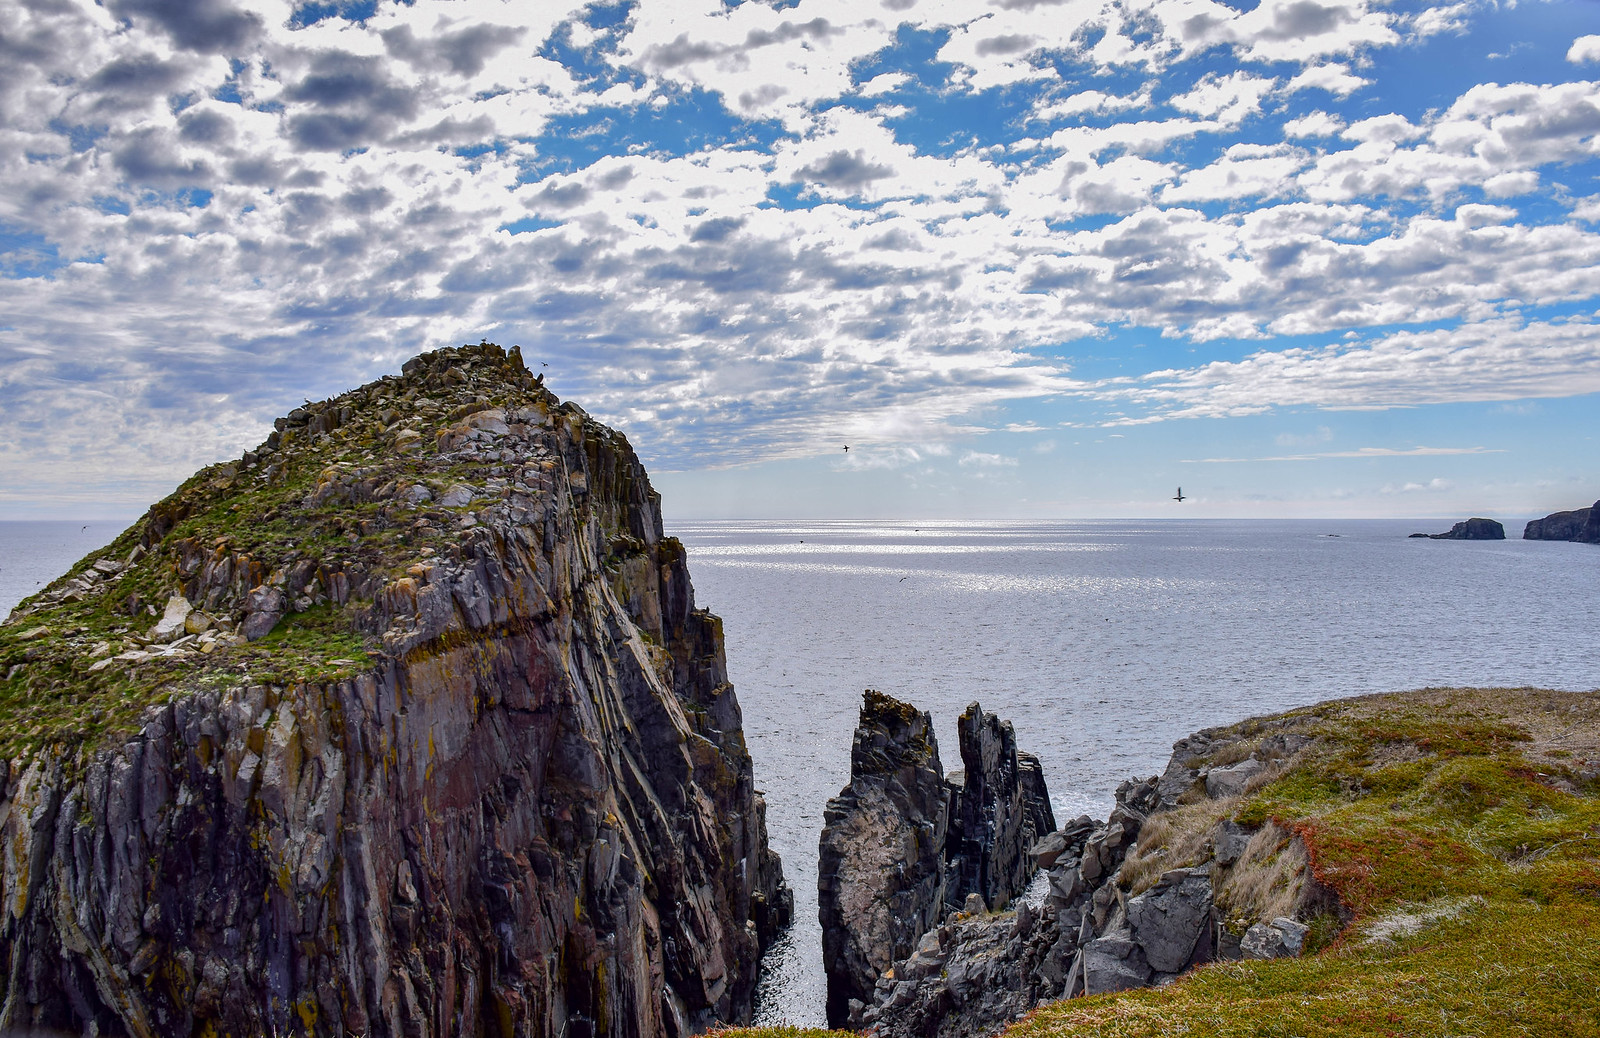 A rugged island with a puffin colony in Newfoundland